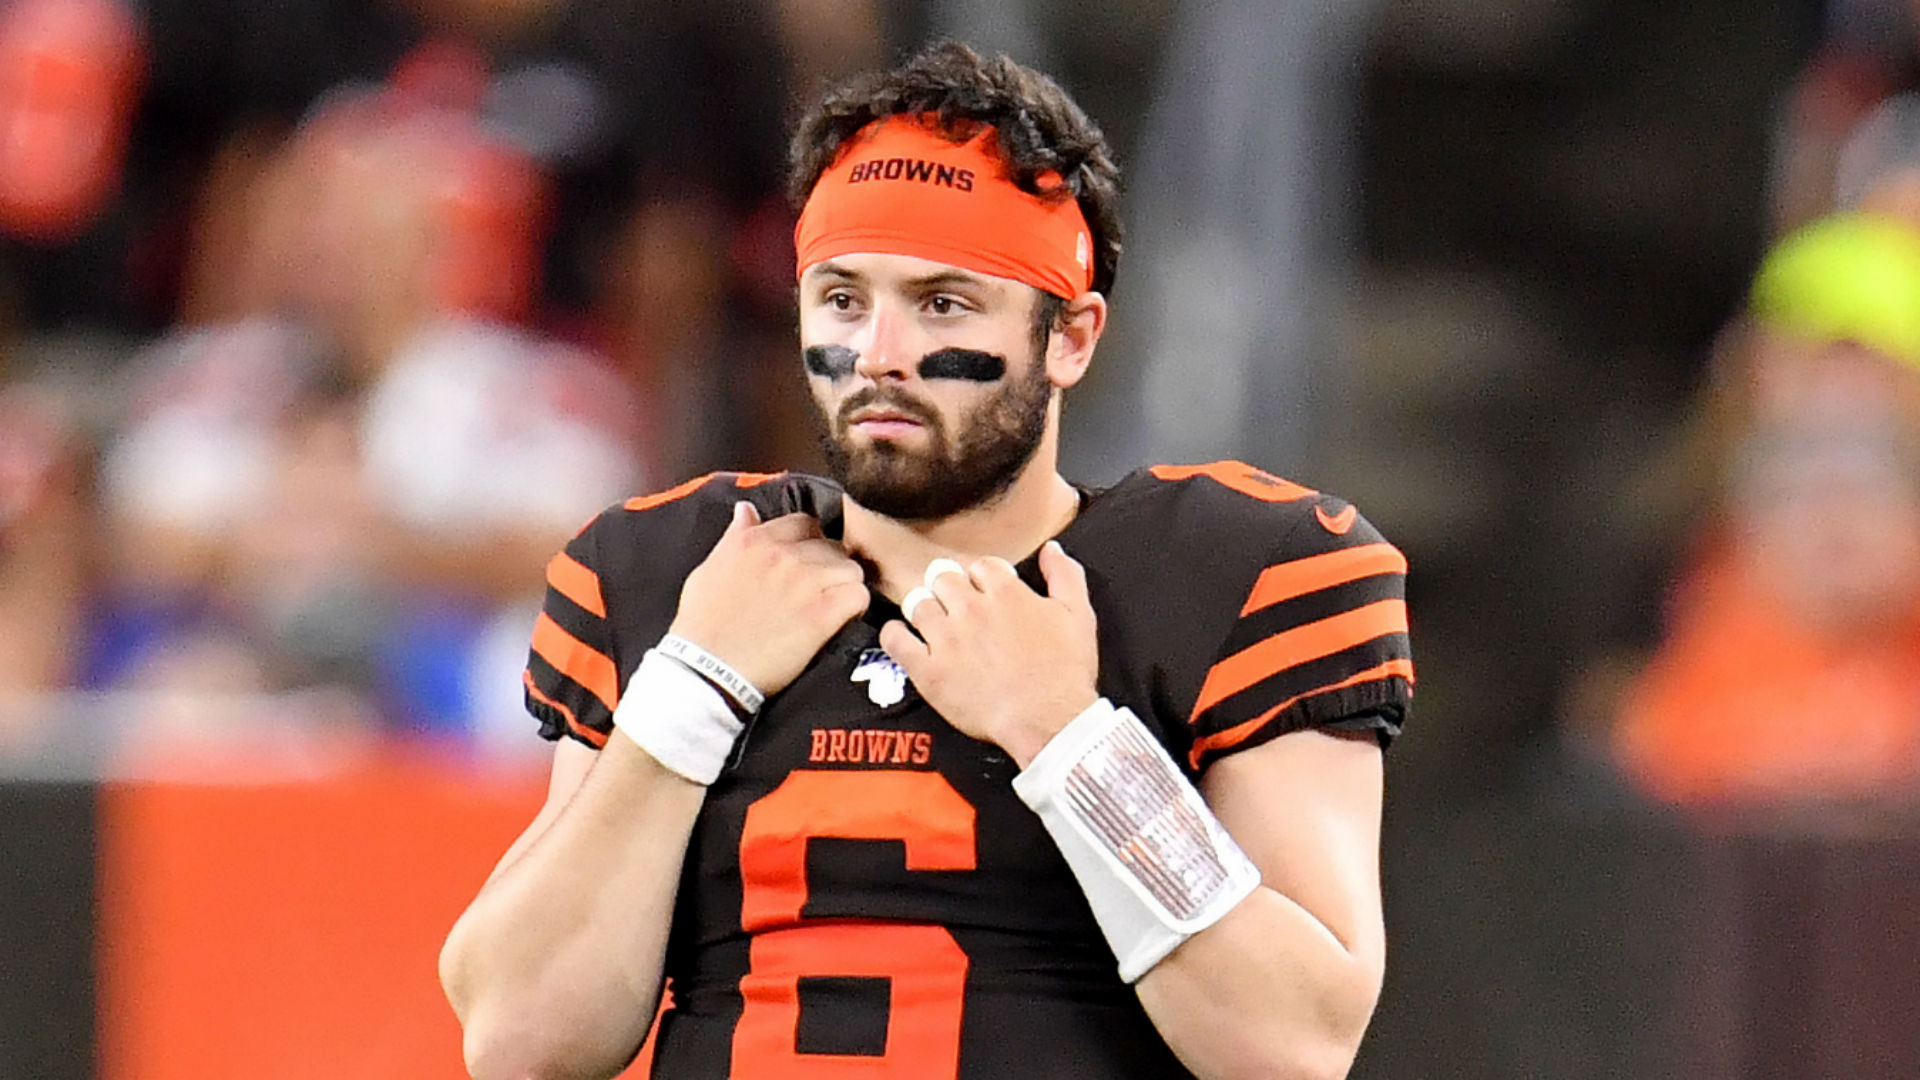 Baker Mayfield walks out of press conference after exchange with